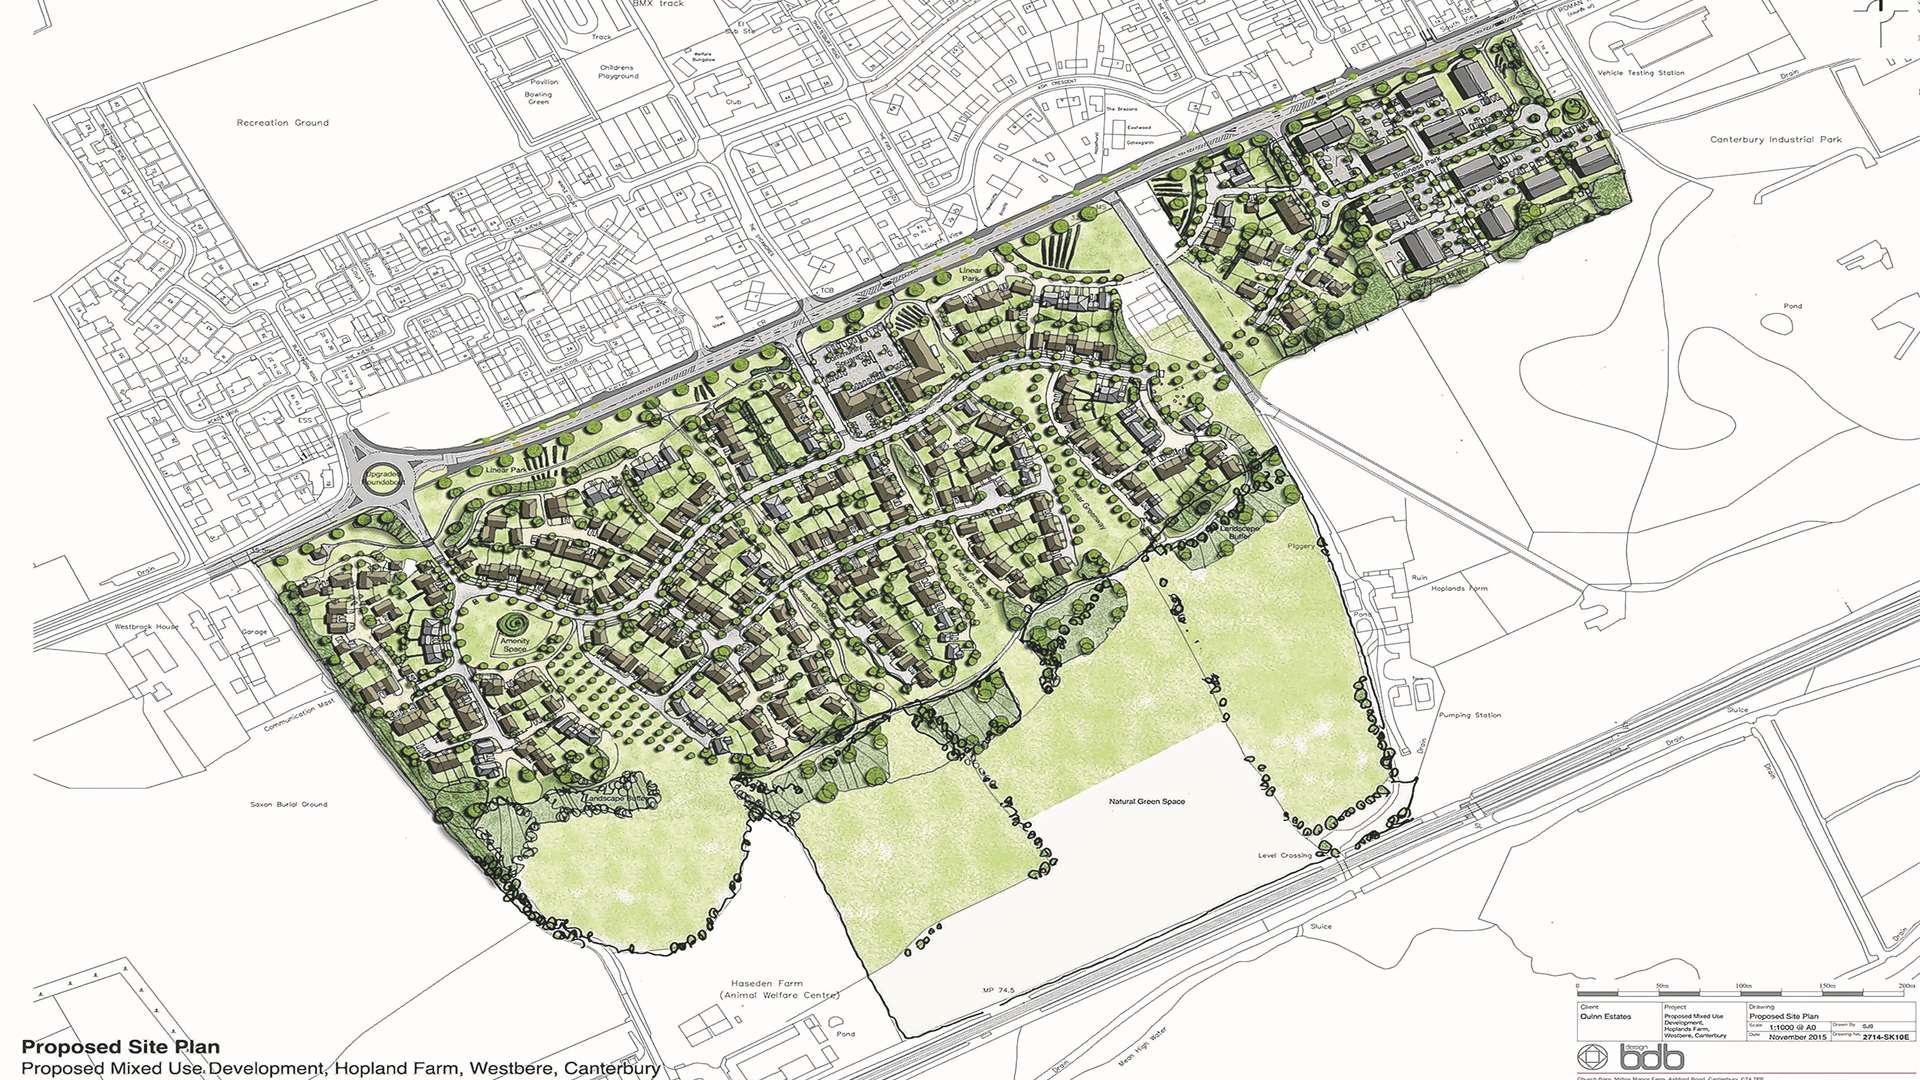 Plans for the Hoplands farm site in Hersden